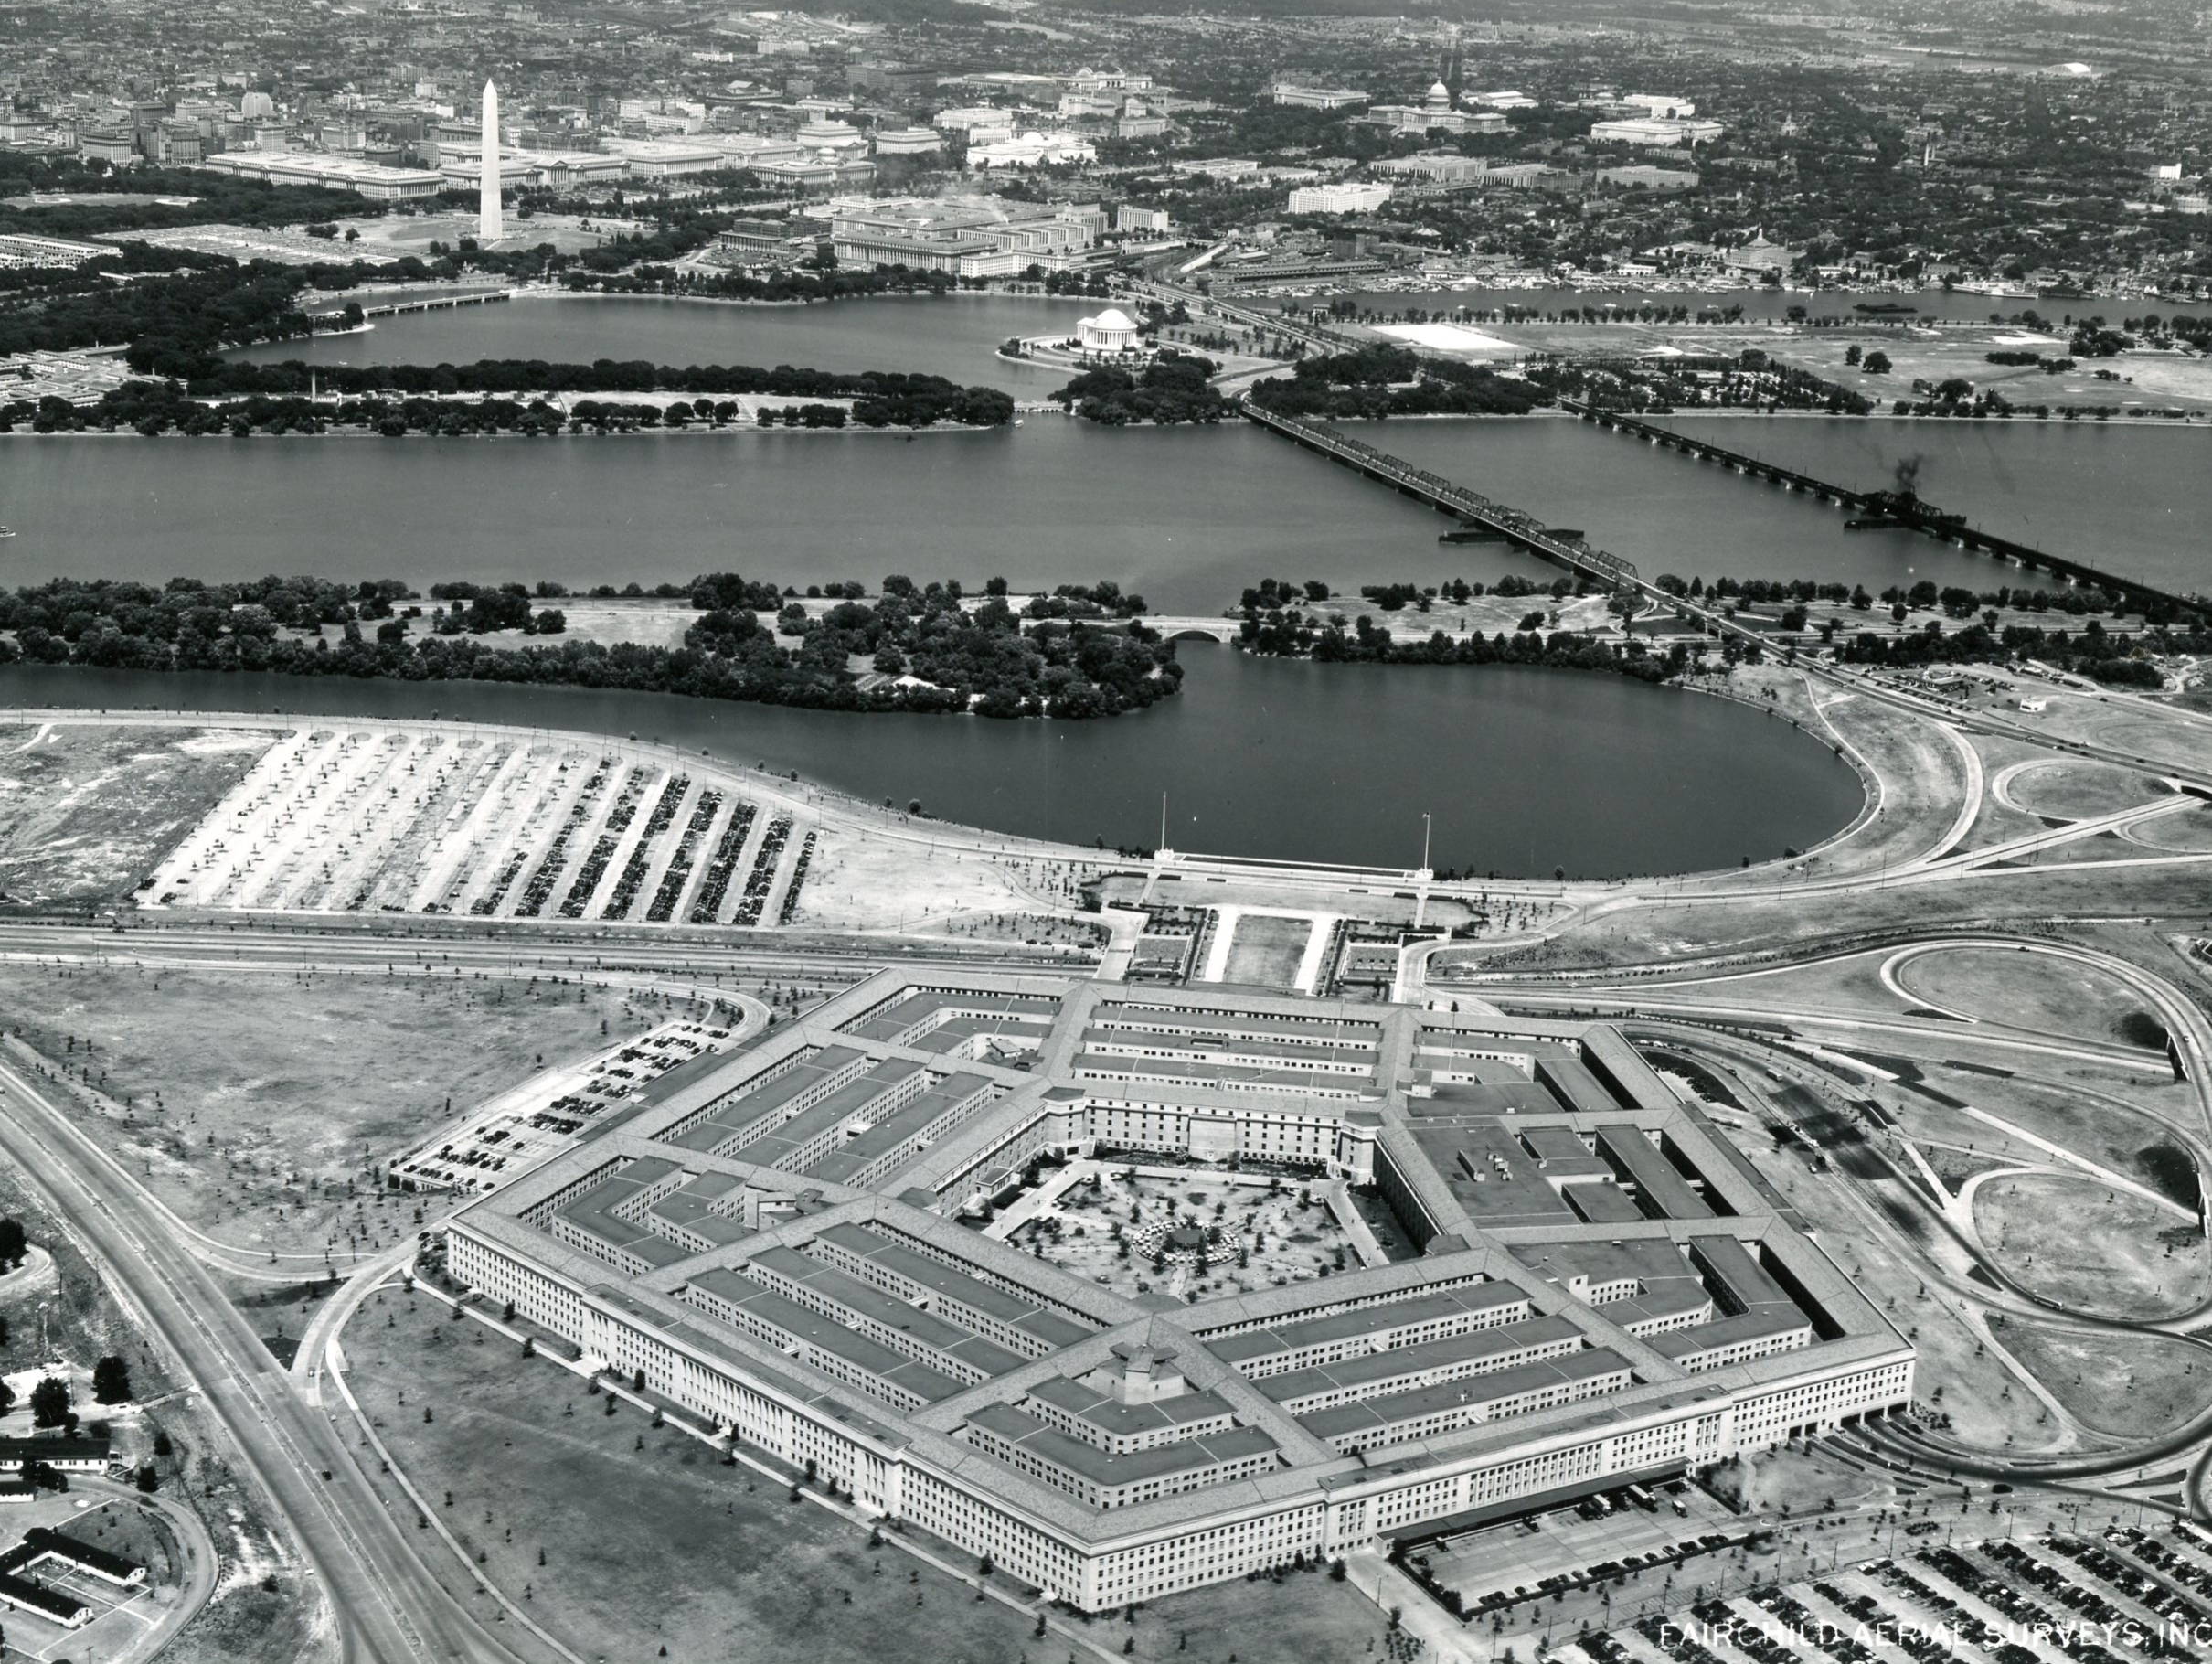 The Pentagon with National Mall across the river